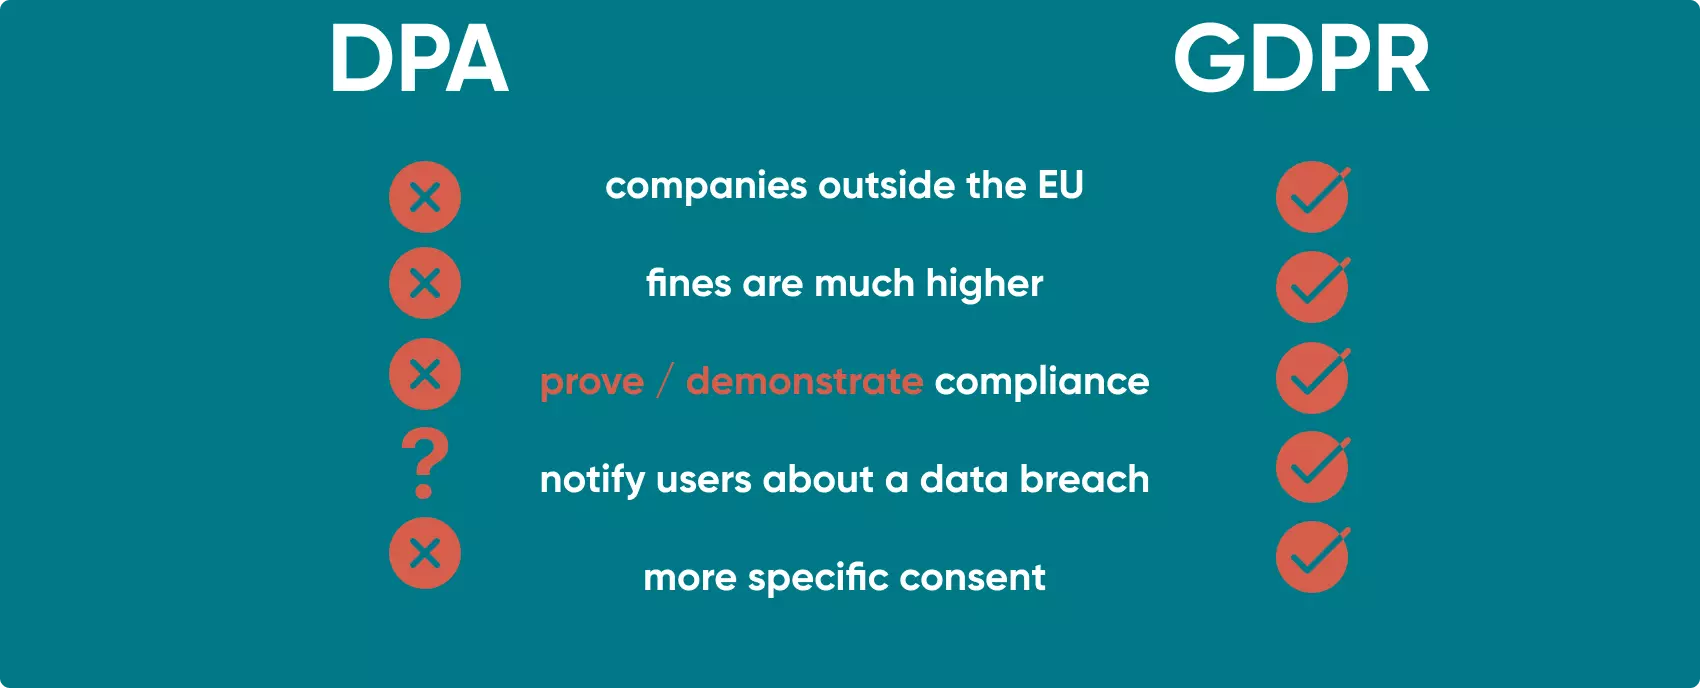 The GDPR and the DPA have some differences, and you should know them to ensure that your business complies with the GDPR.